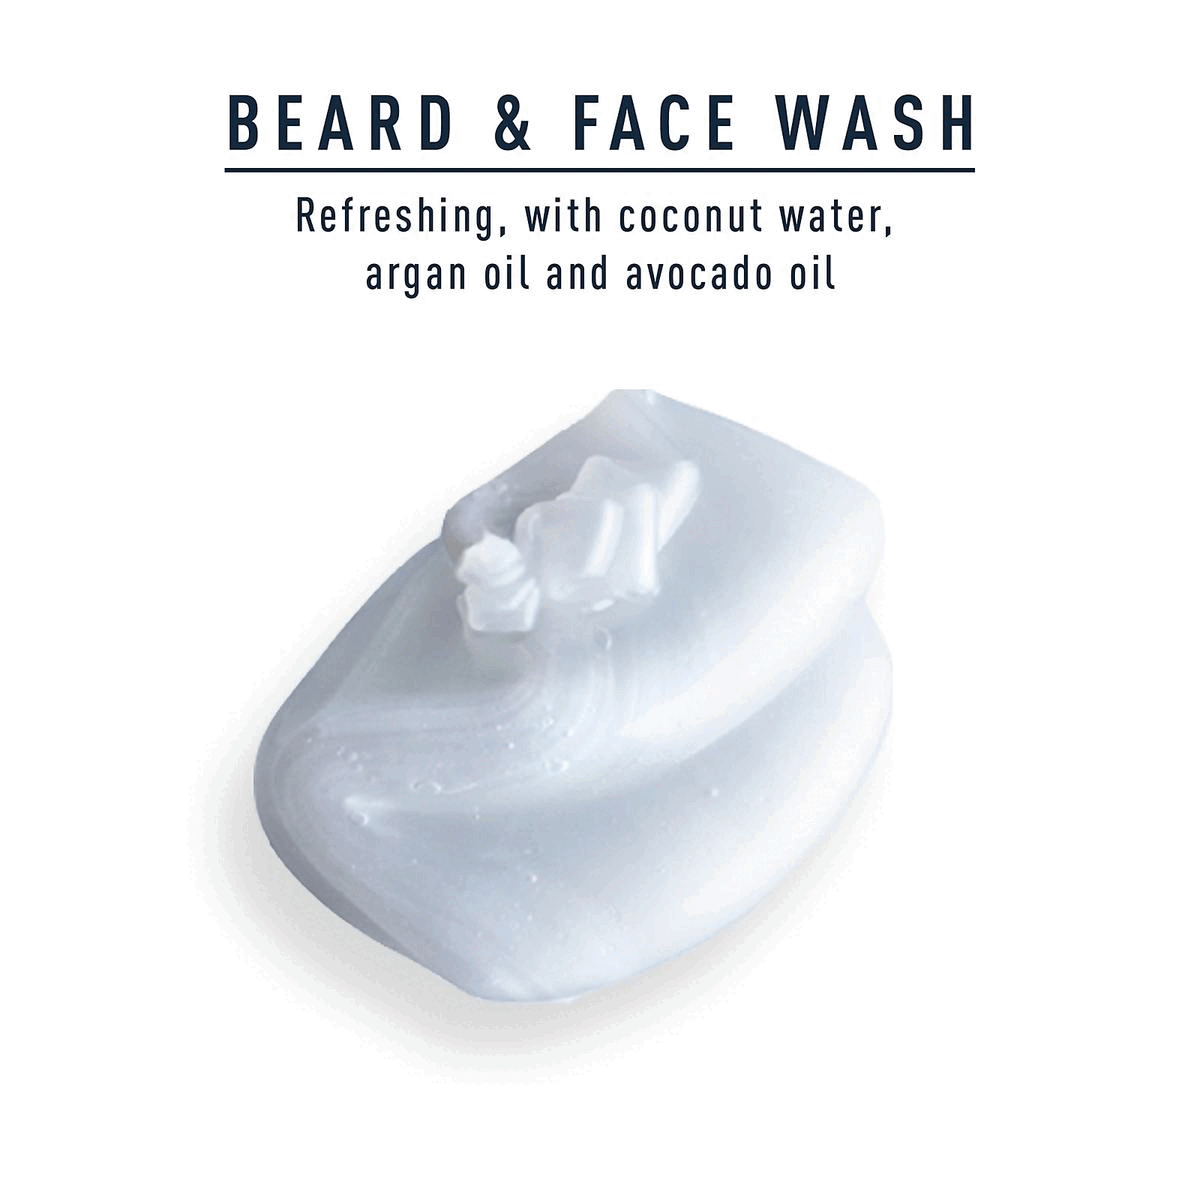 Image 1 Beard and Face wash, refreshing with coconut water,argan oil and avacado oil Image 2 Beard Oil, softening with plant based argan, joijoba, avocado, aacadamia and almond oils.